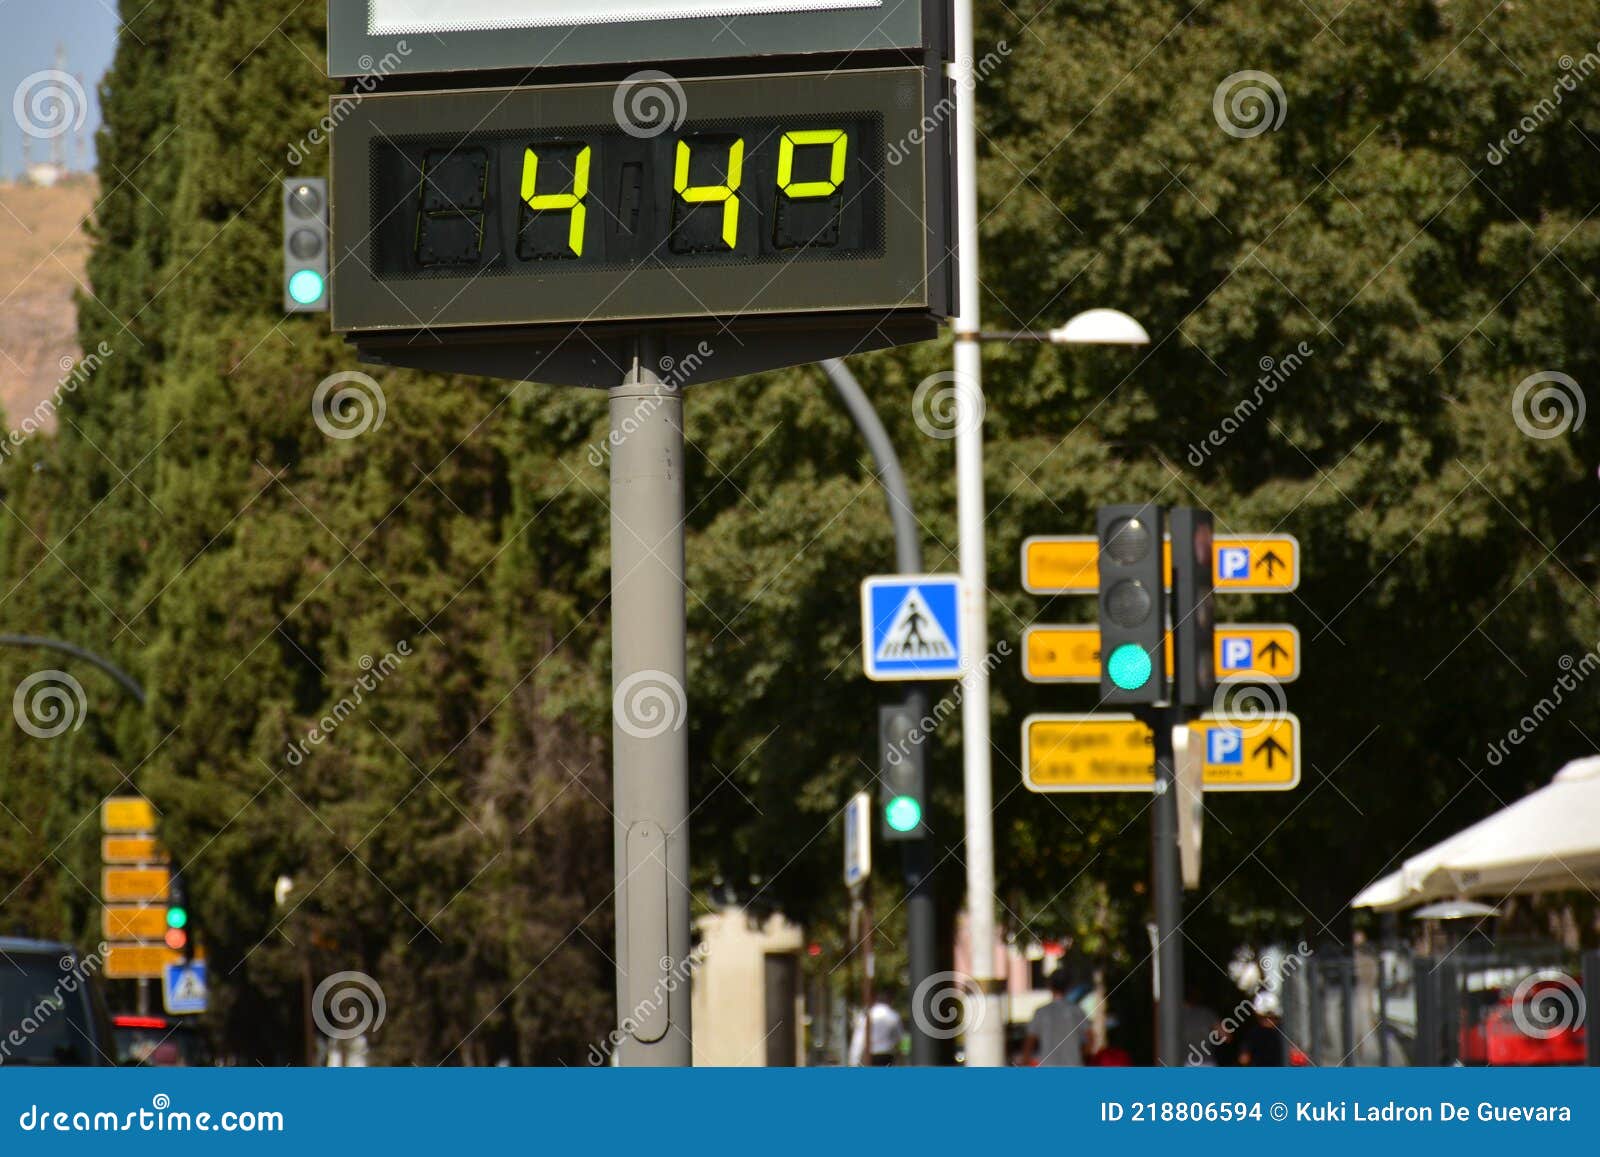 street thermometer marking 44 degrees